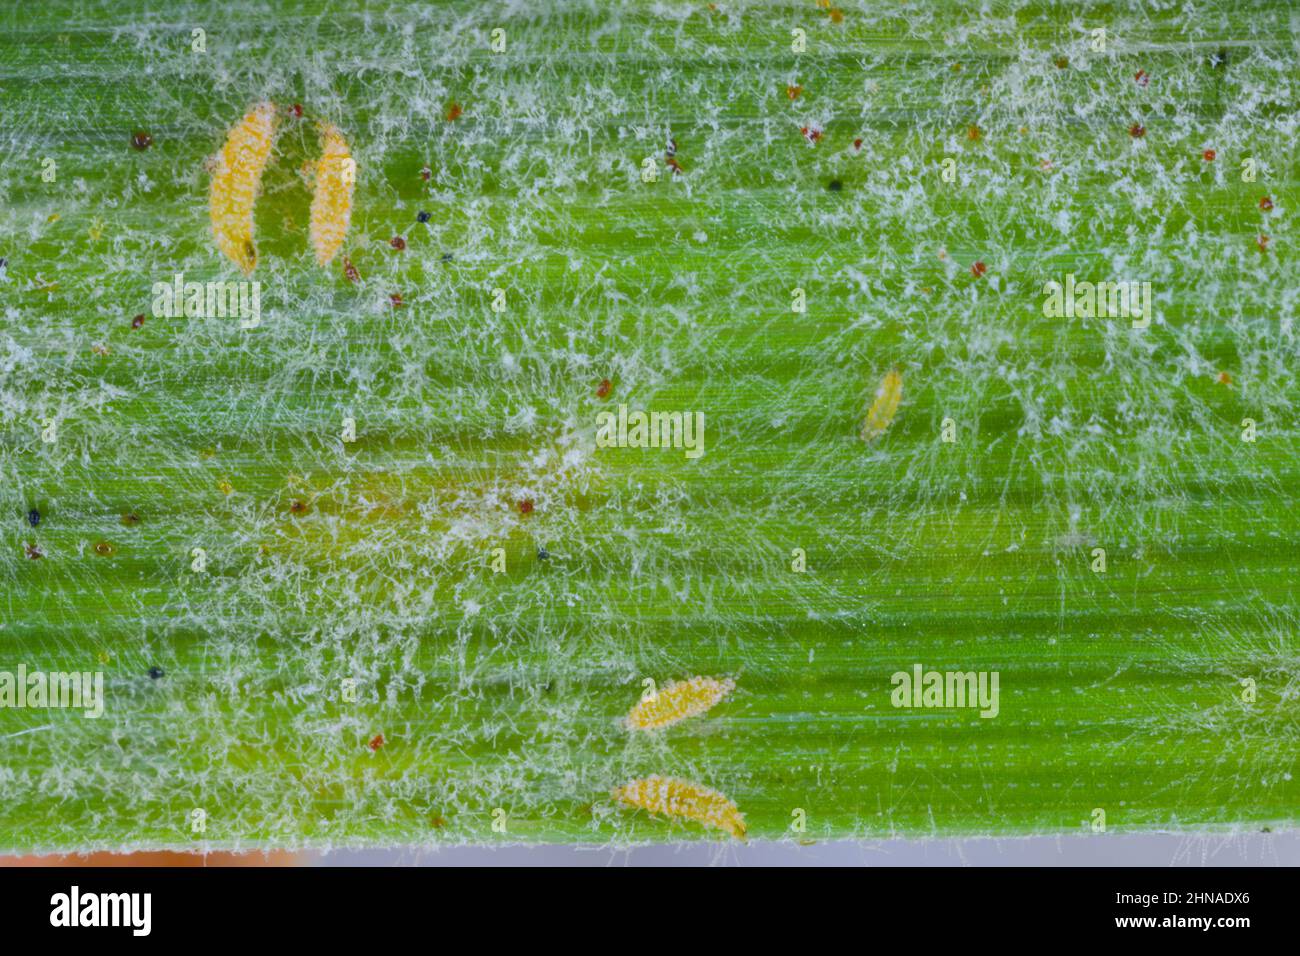 Thrips and powdery mildew on a cereal leaf. Stock Photo